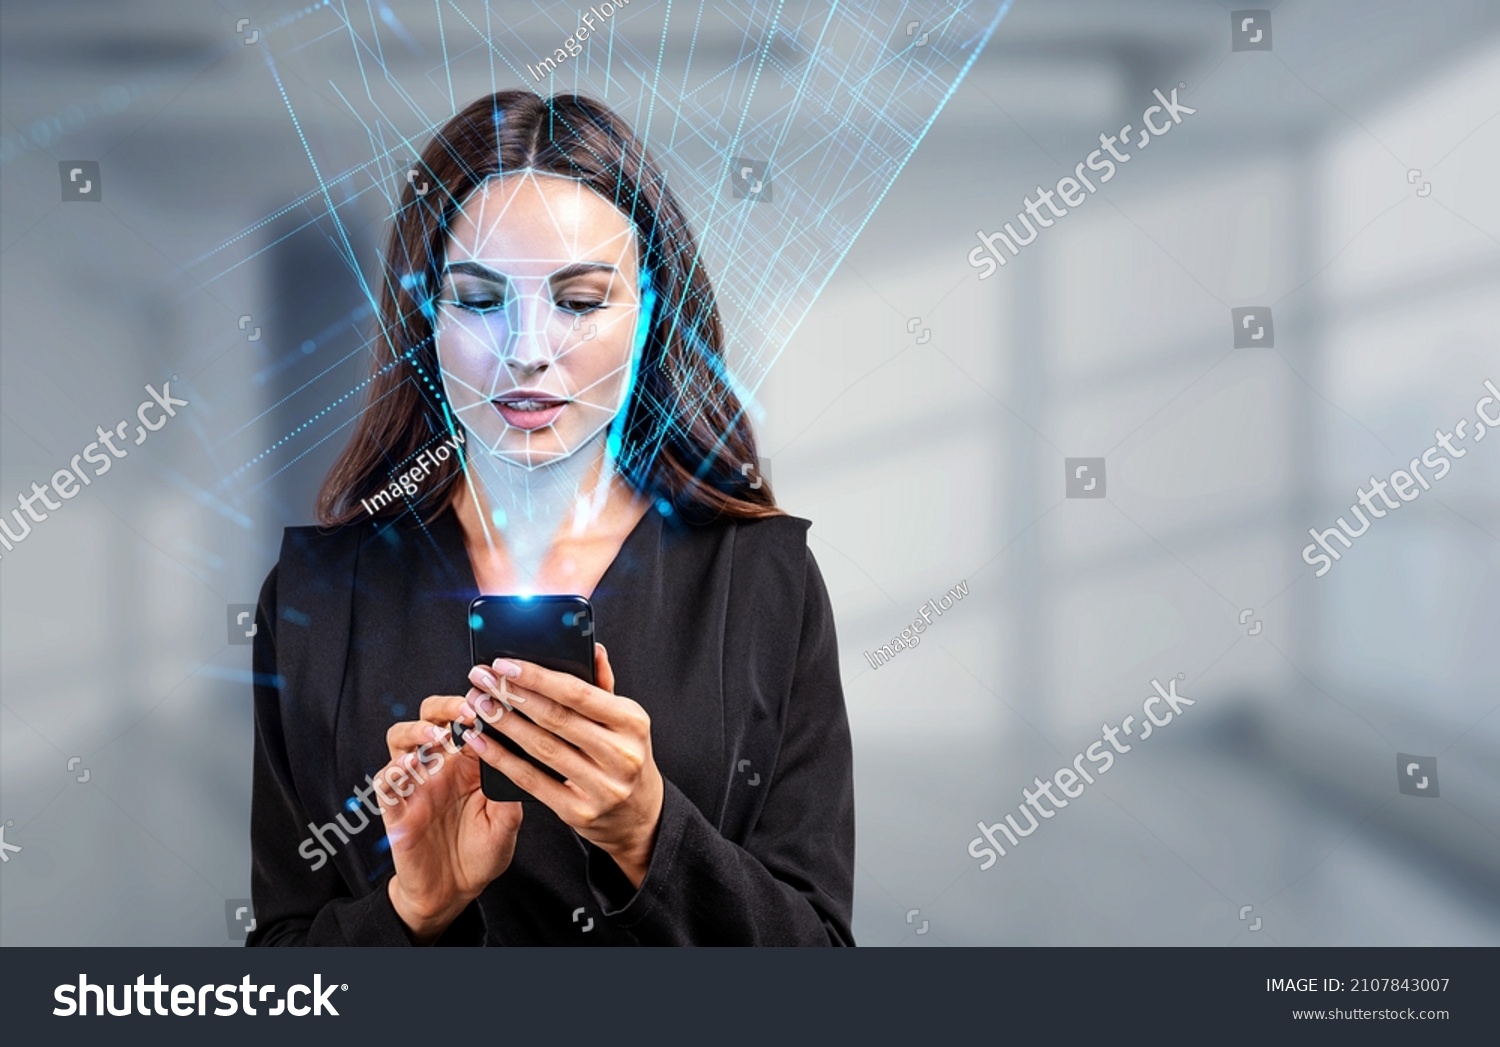 Businesswoman with phone in hands, biometric verification and face detection. Unlocking smartphone with facial scanner. Concept of face id and high tech technology #2107843007